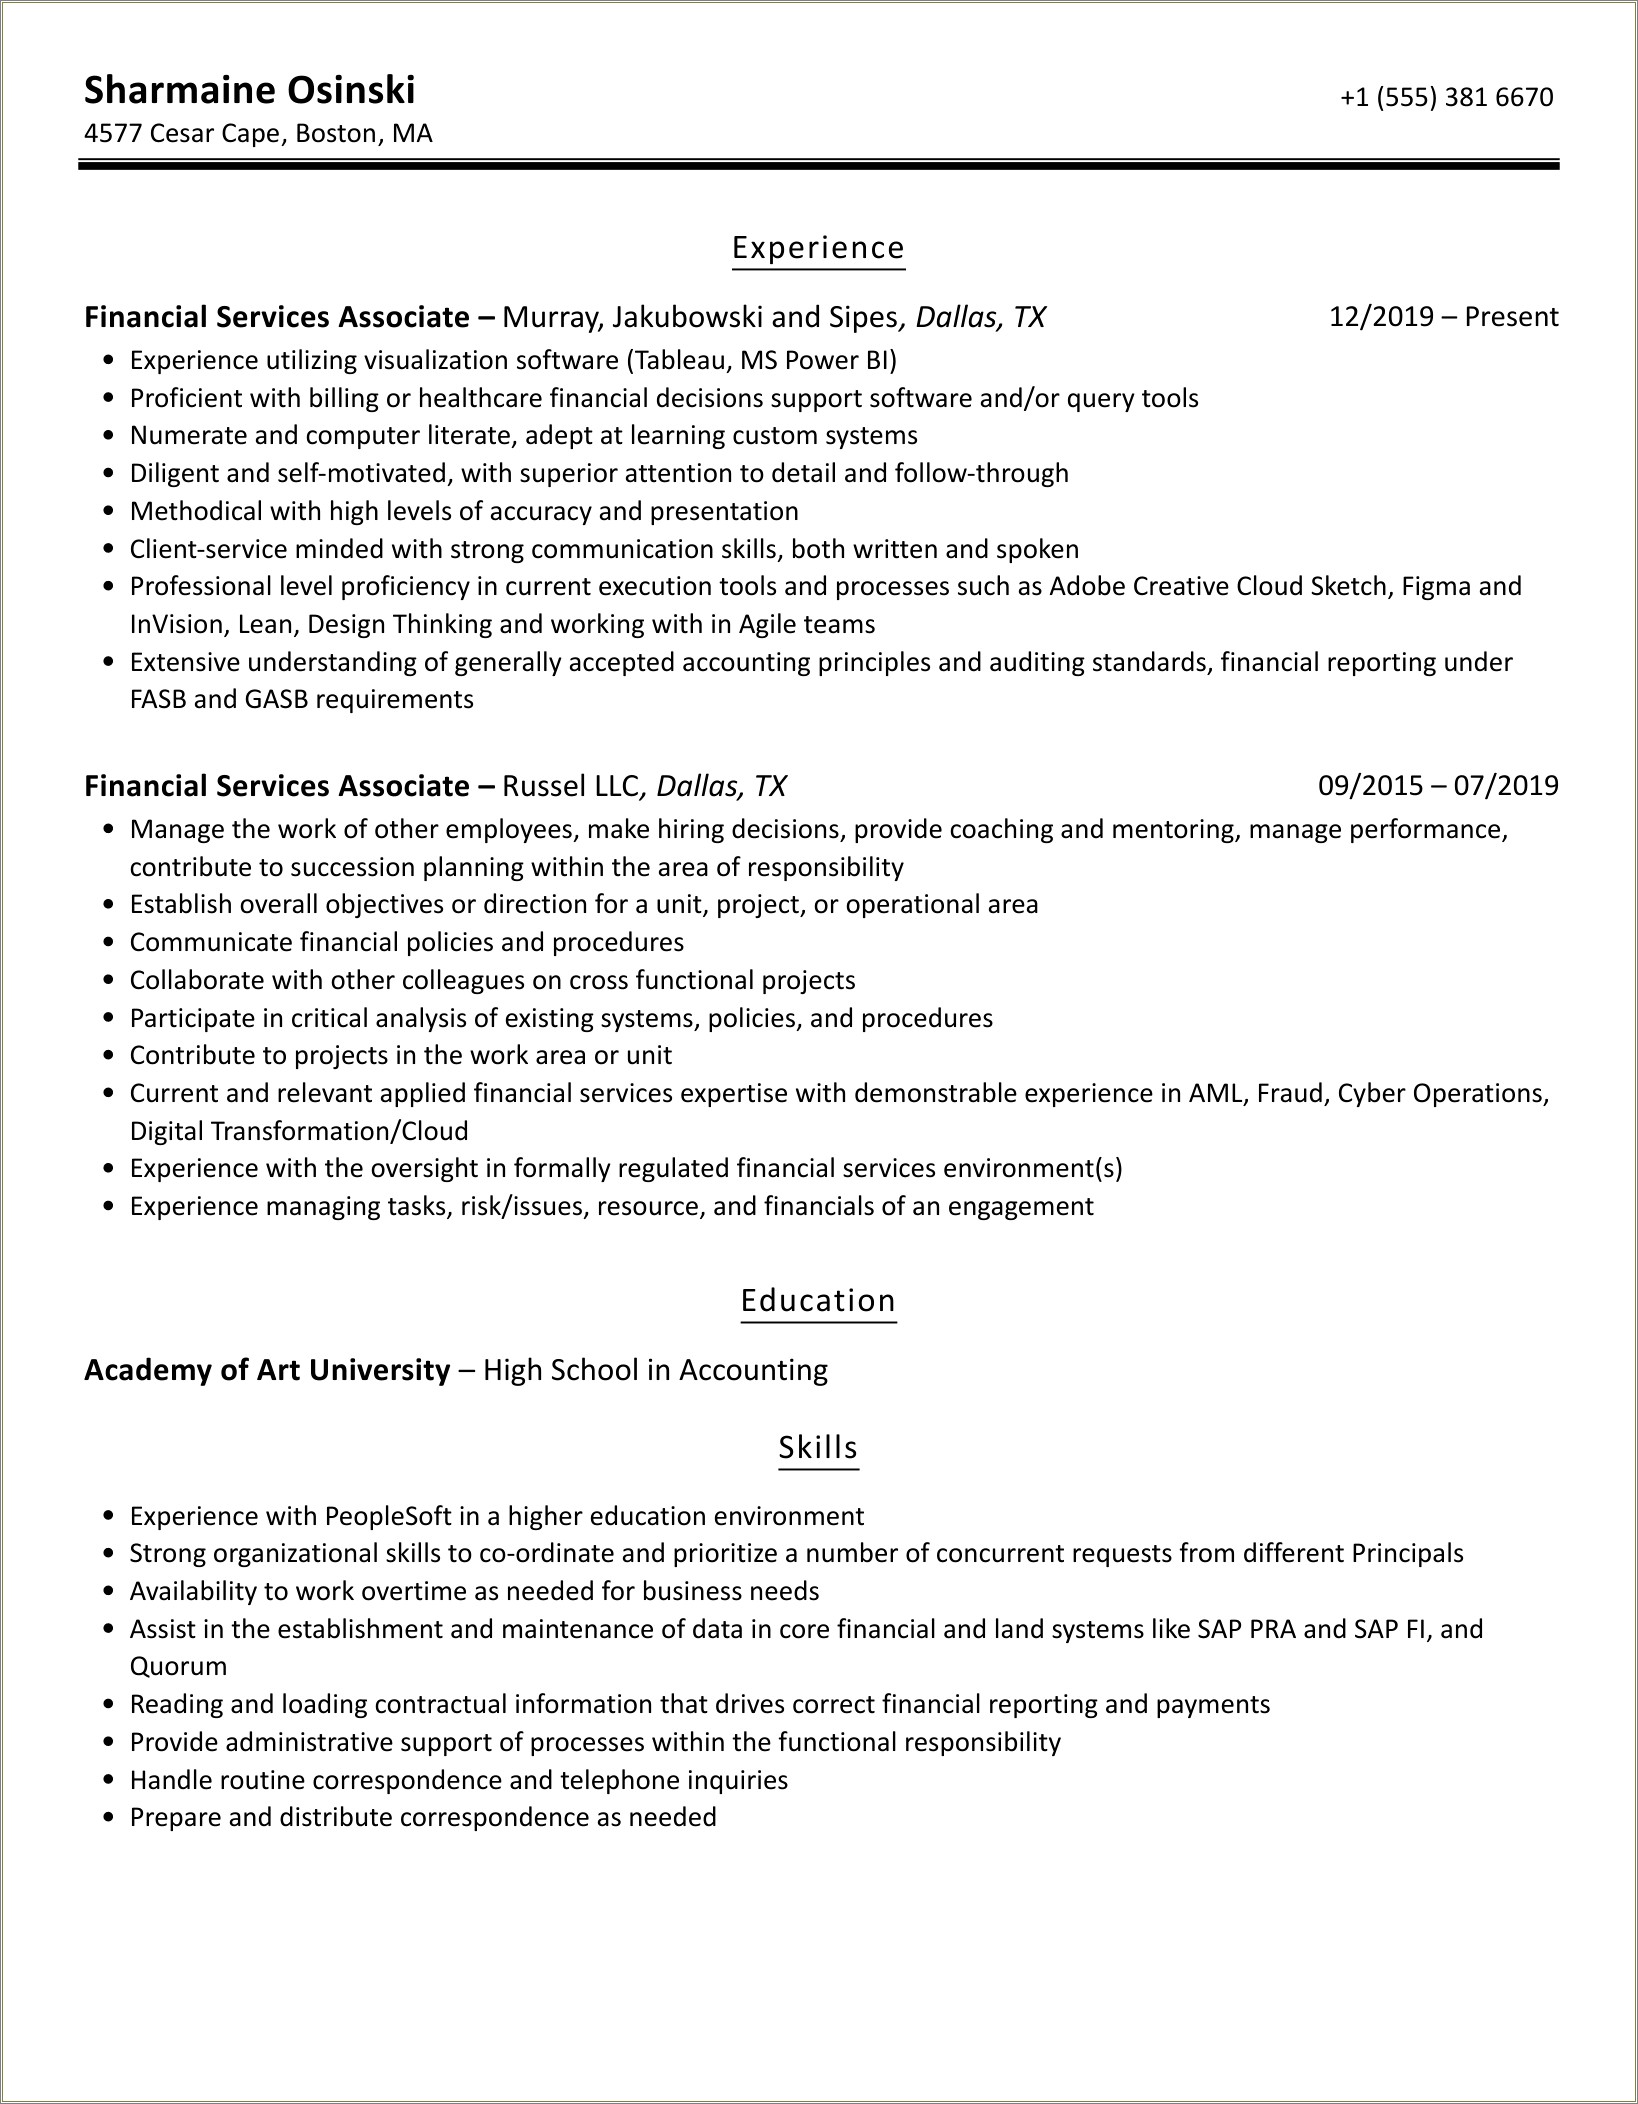 Prudential Financial Professional Associate Resume Example